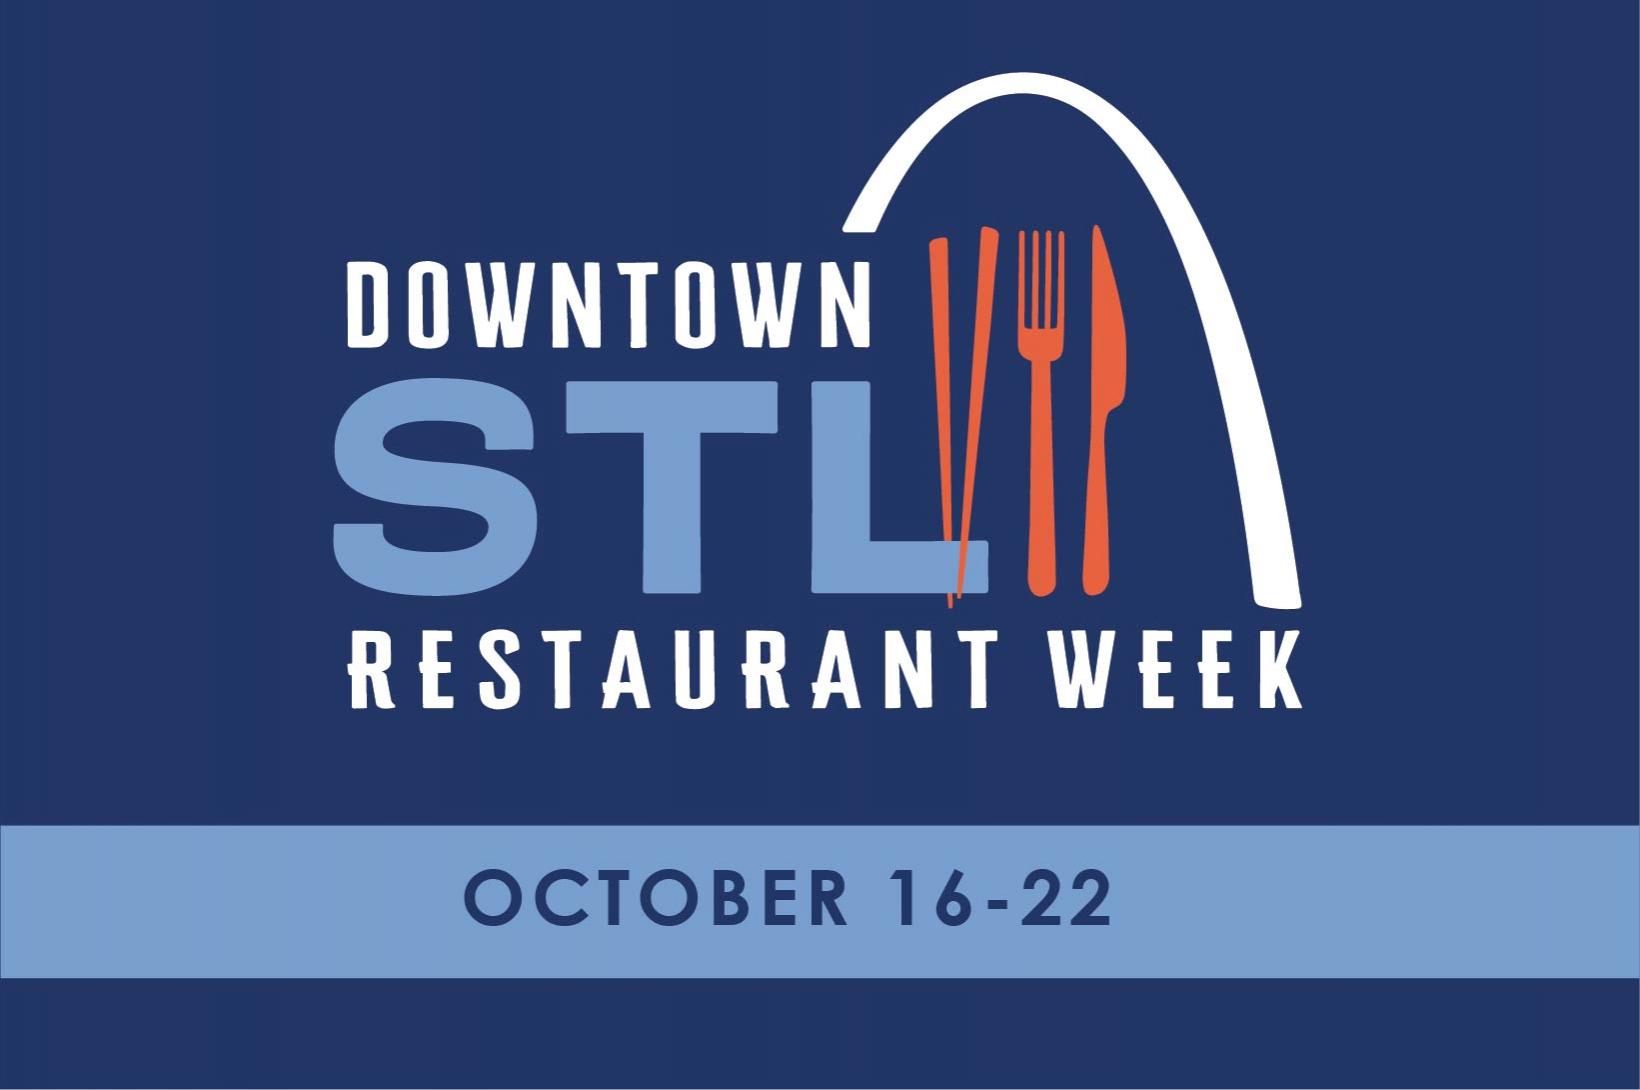 Downtown Restaurant Week Returns for the First Time Since 2019